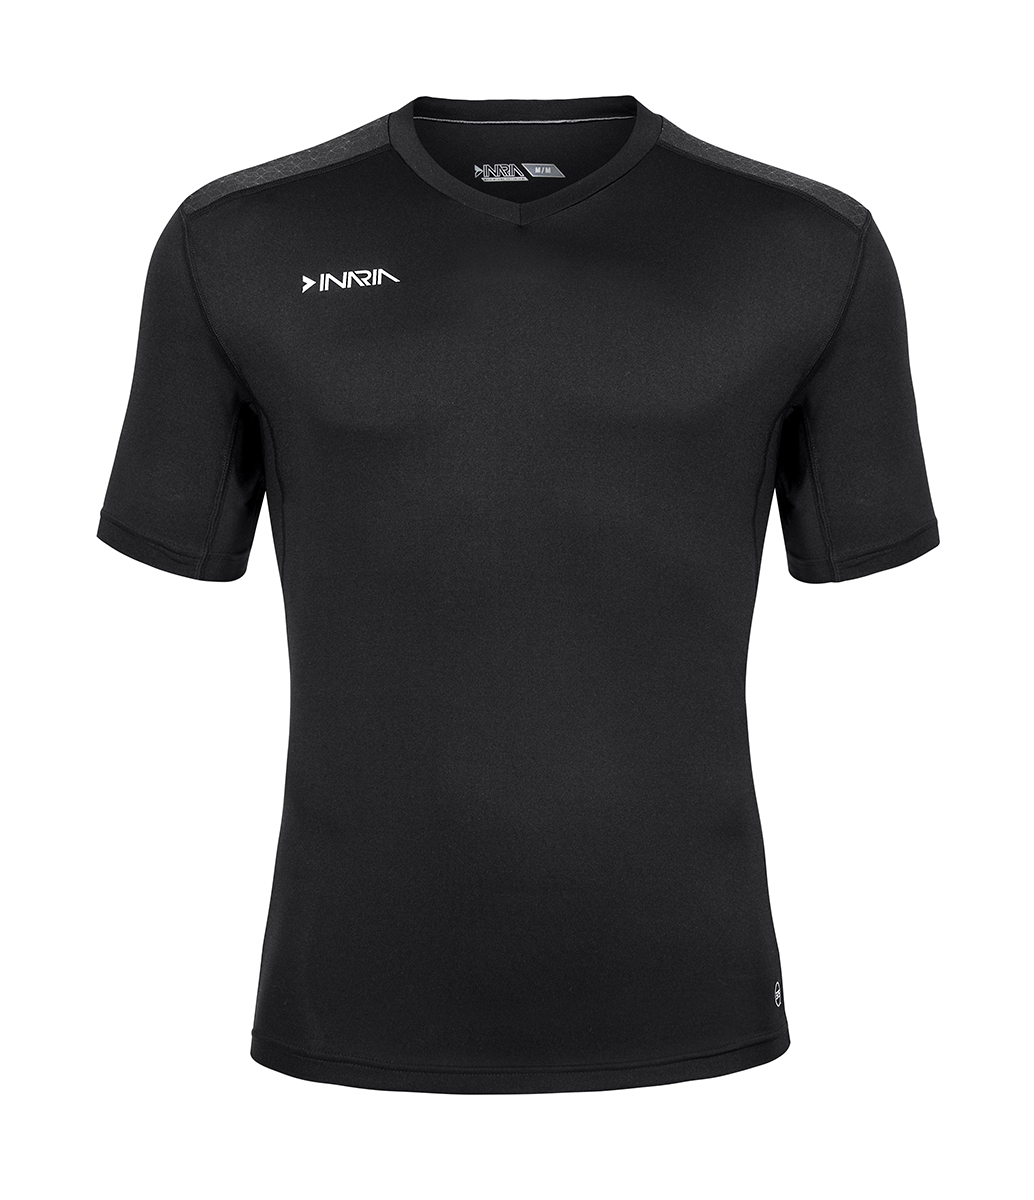 Ravello Short-Sleeve Compression Top | INARIA Soccer